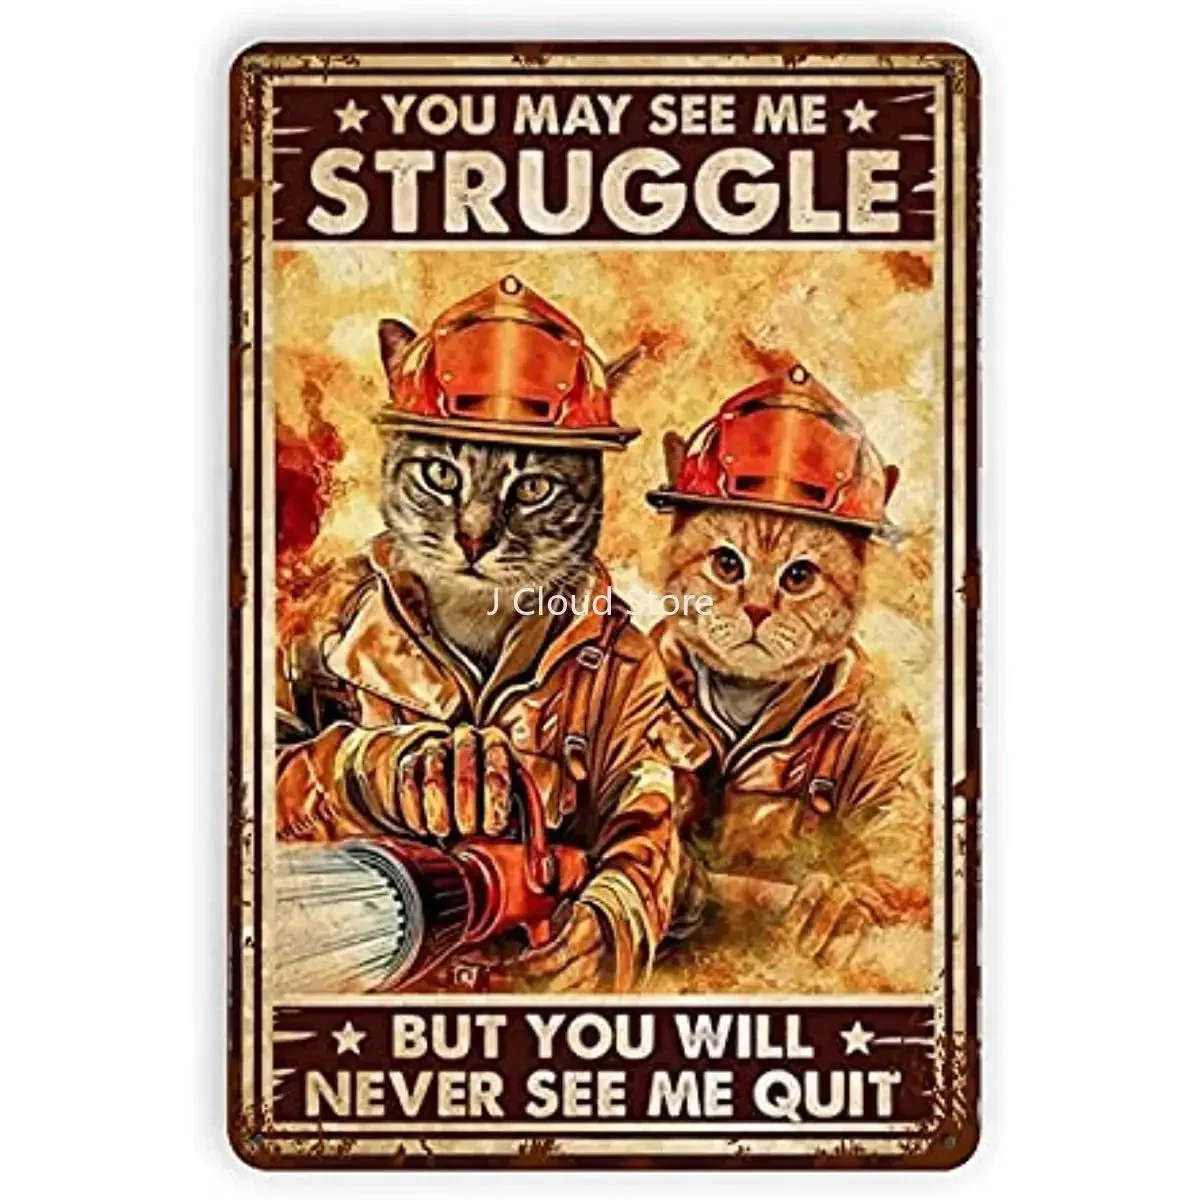 Tin Sign Vintage Cat Firefighter Poster Garden Bathroom Bedroom Club Wall Decoration Birthday Gift 12x18 Inches cat retro aviator poster tin sign cute cat bar club man cave home wall decoration 8x12 inches